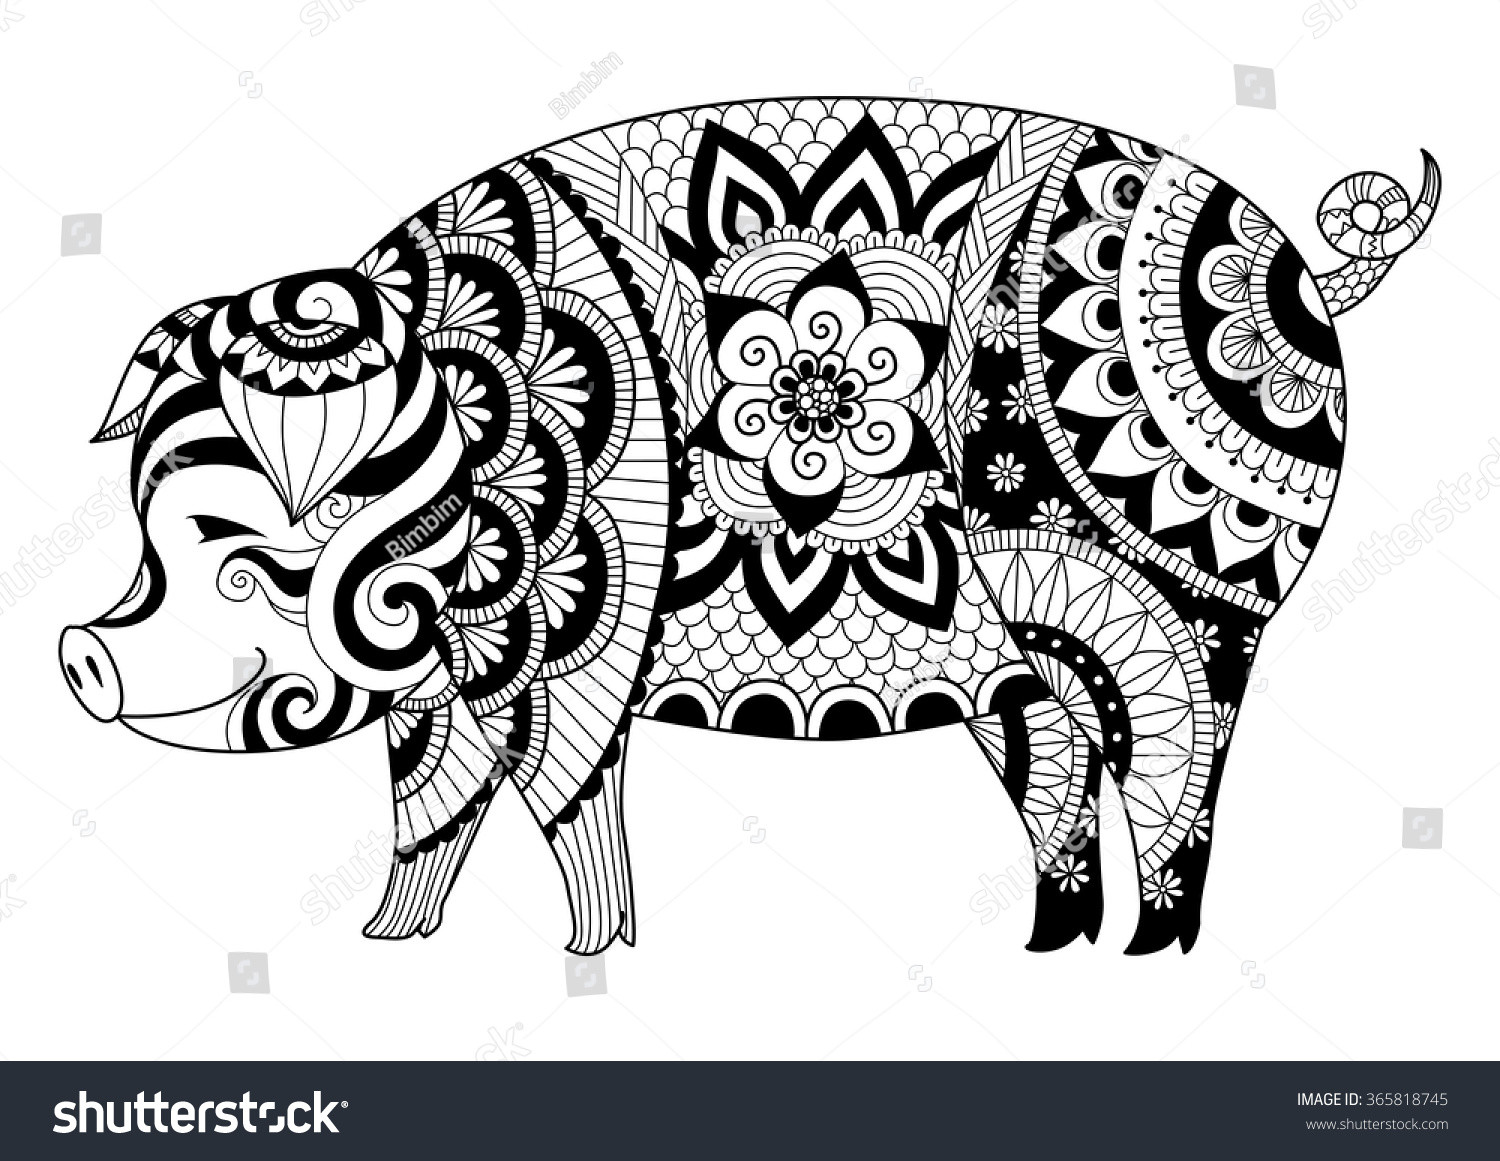 Pig Coloring Pages For Adults
 Drawing Zentangle Pig Coloring Book Adult Stock Vector